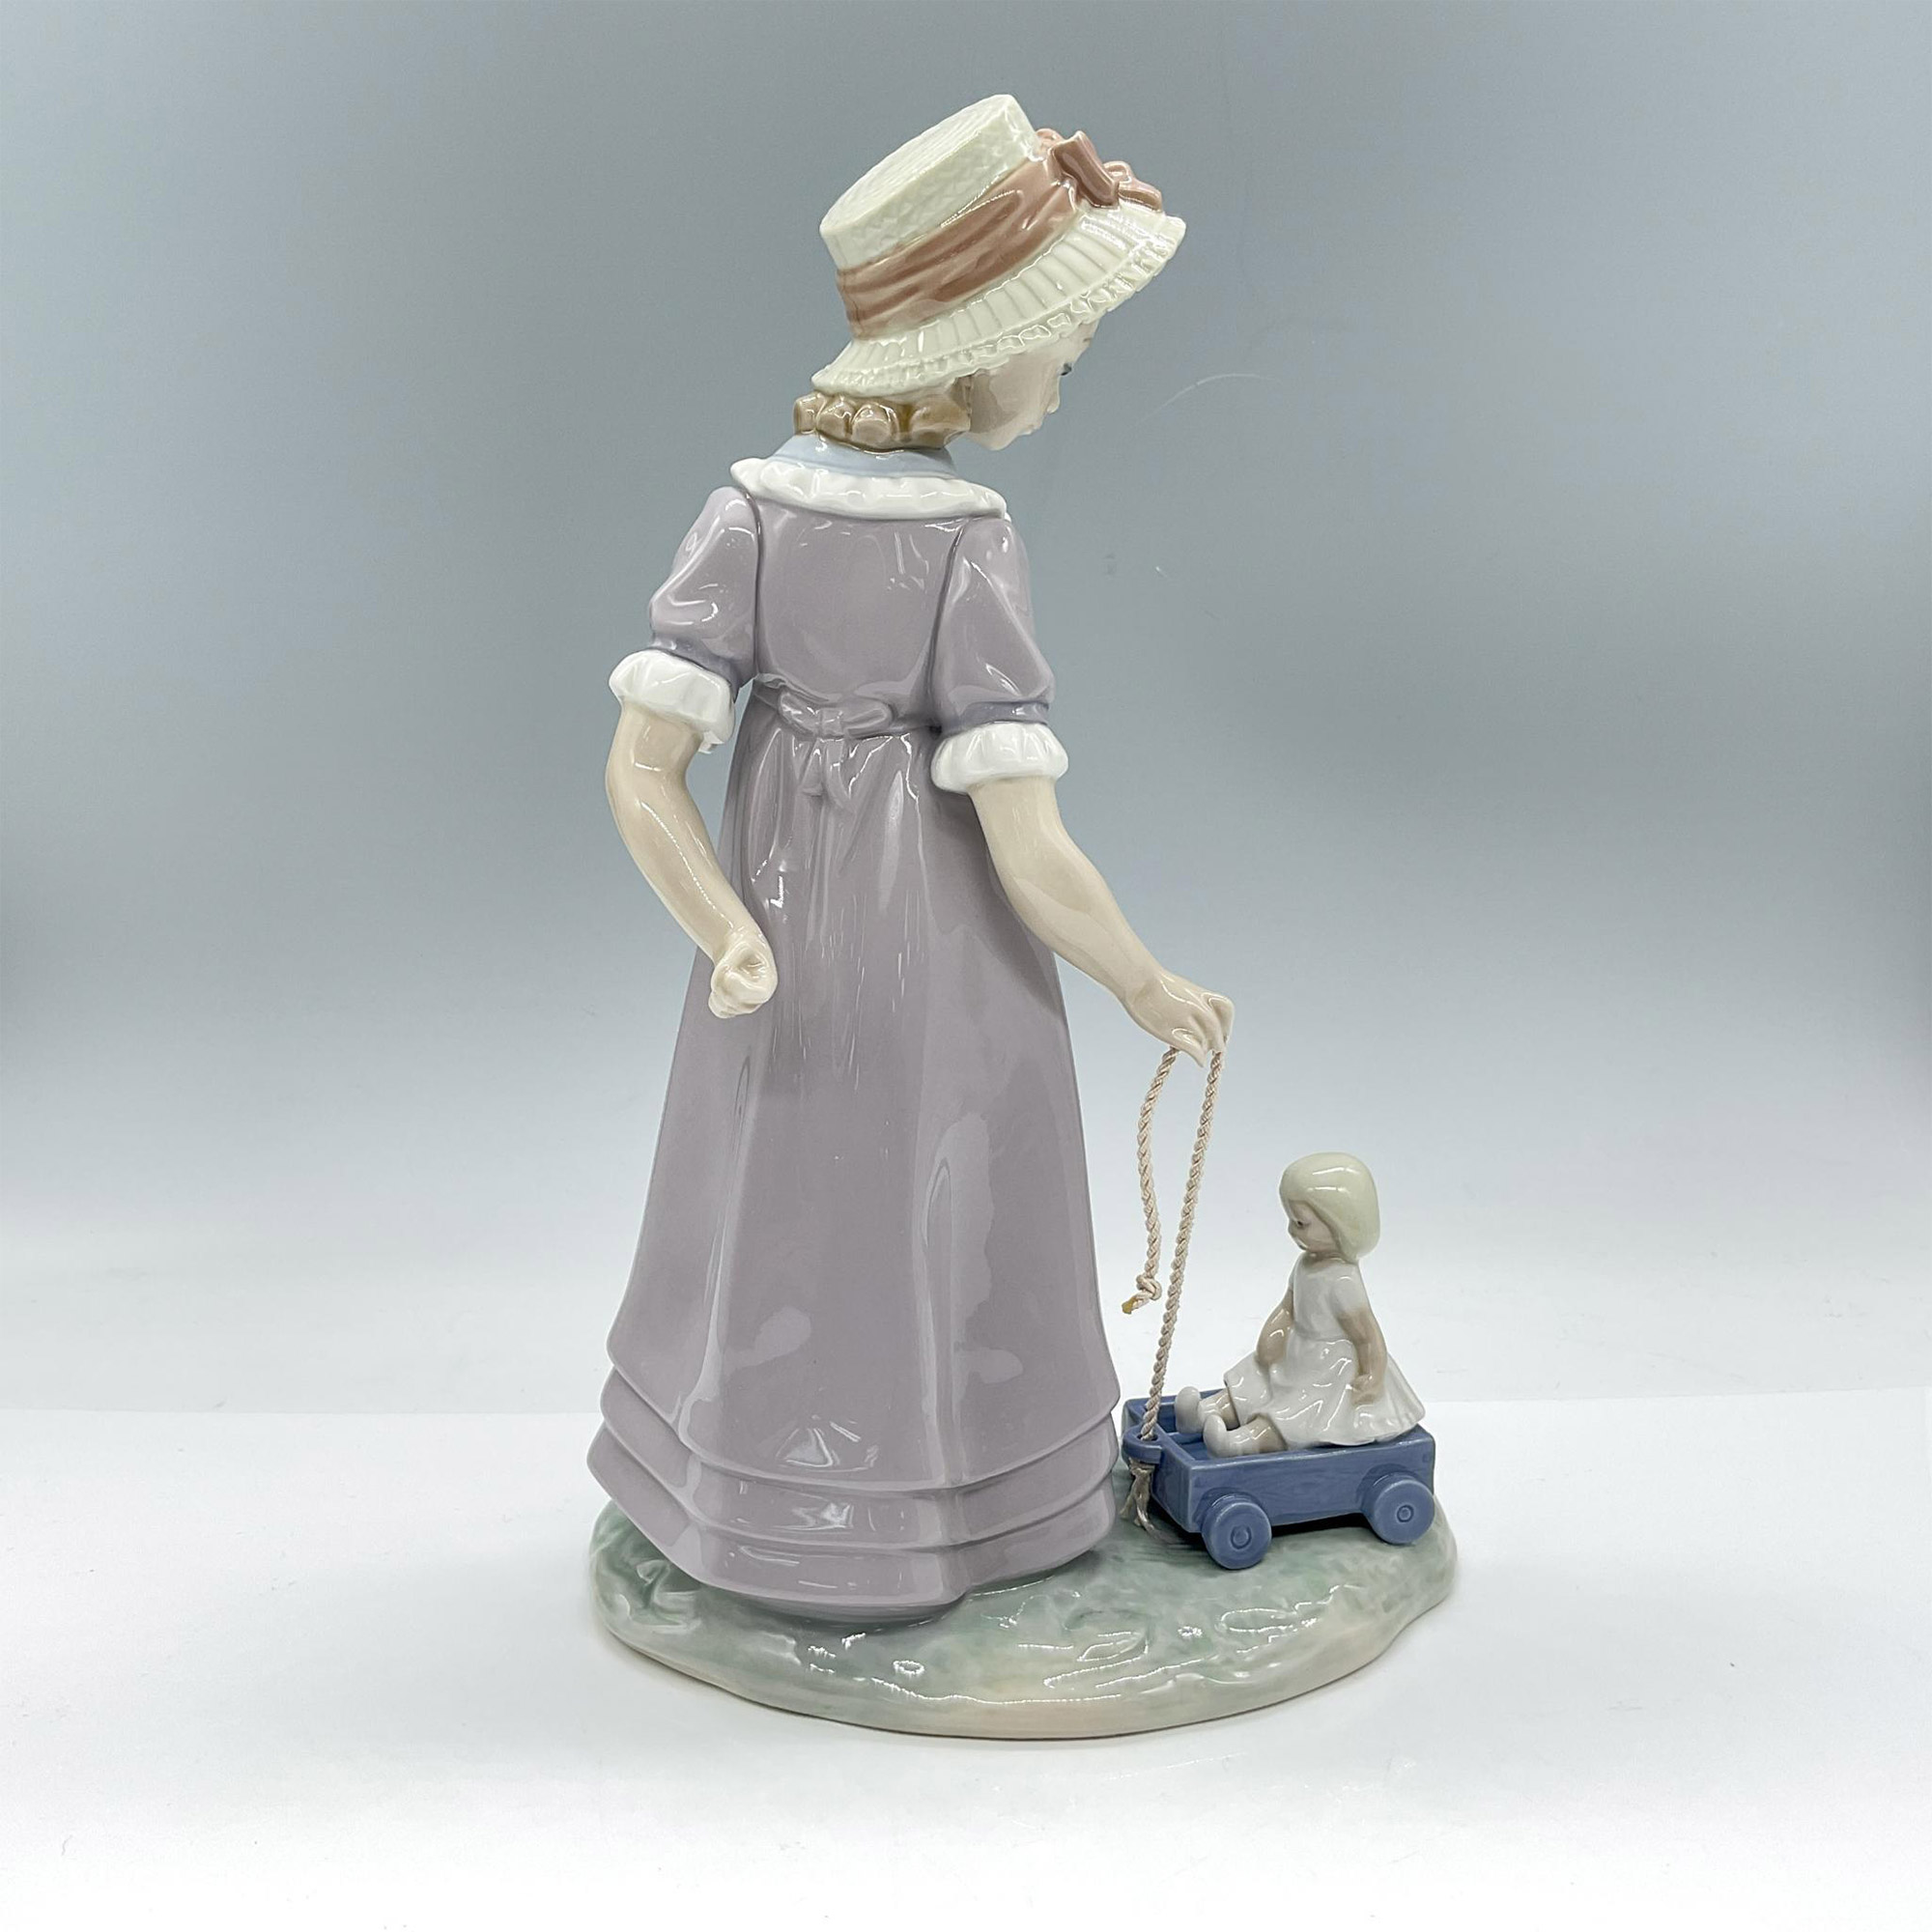 Girl with Toy Wagon 1005044 - Lladro Porcelain Figurine - Image 2 of 3